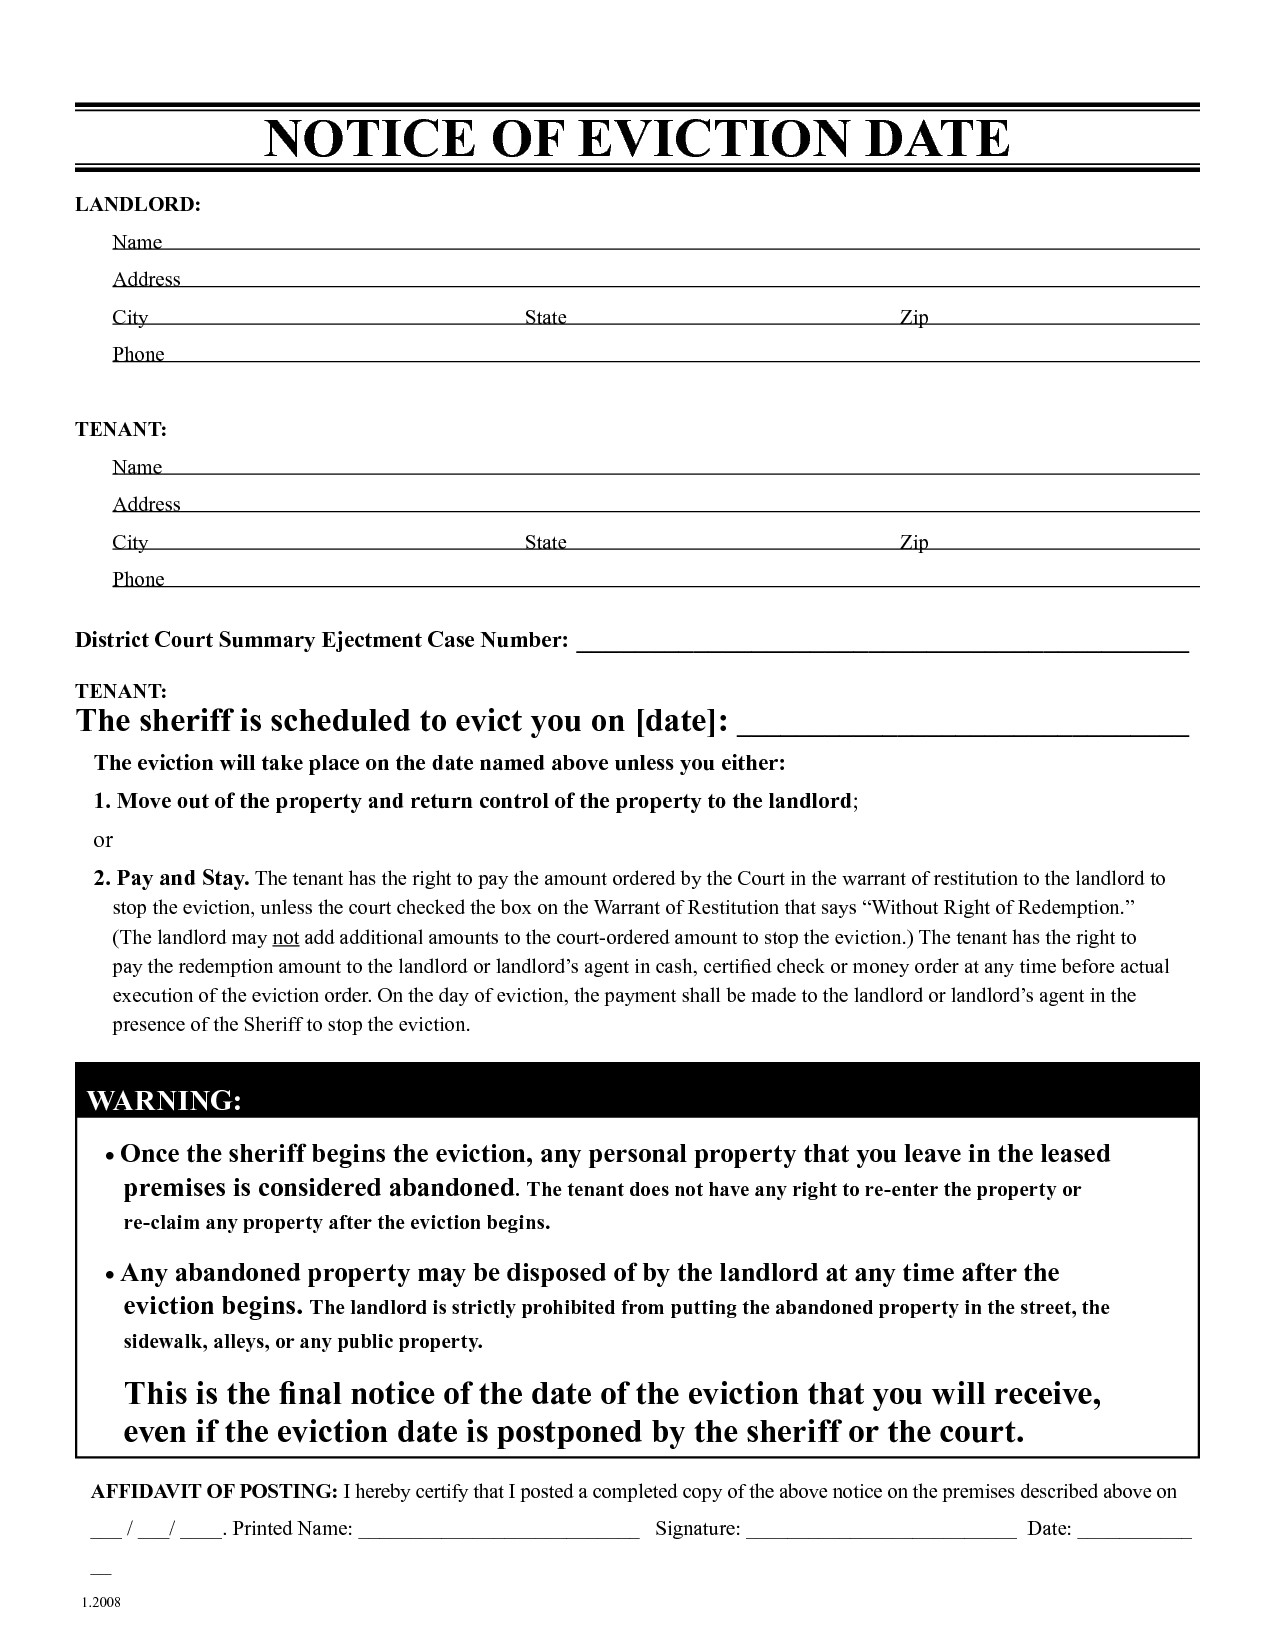 Eviction Notice Letter Template - Free Eviction Notice form New Free Printable Eviction Notice